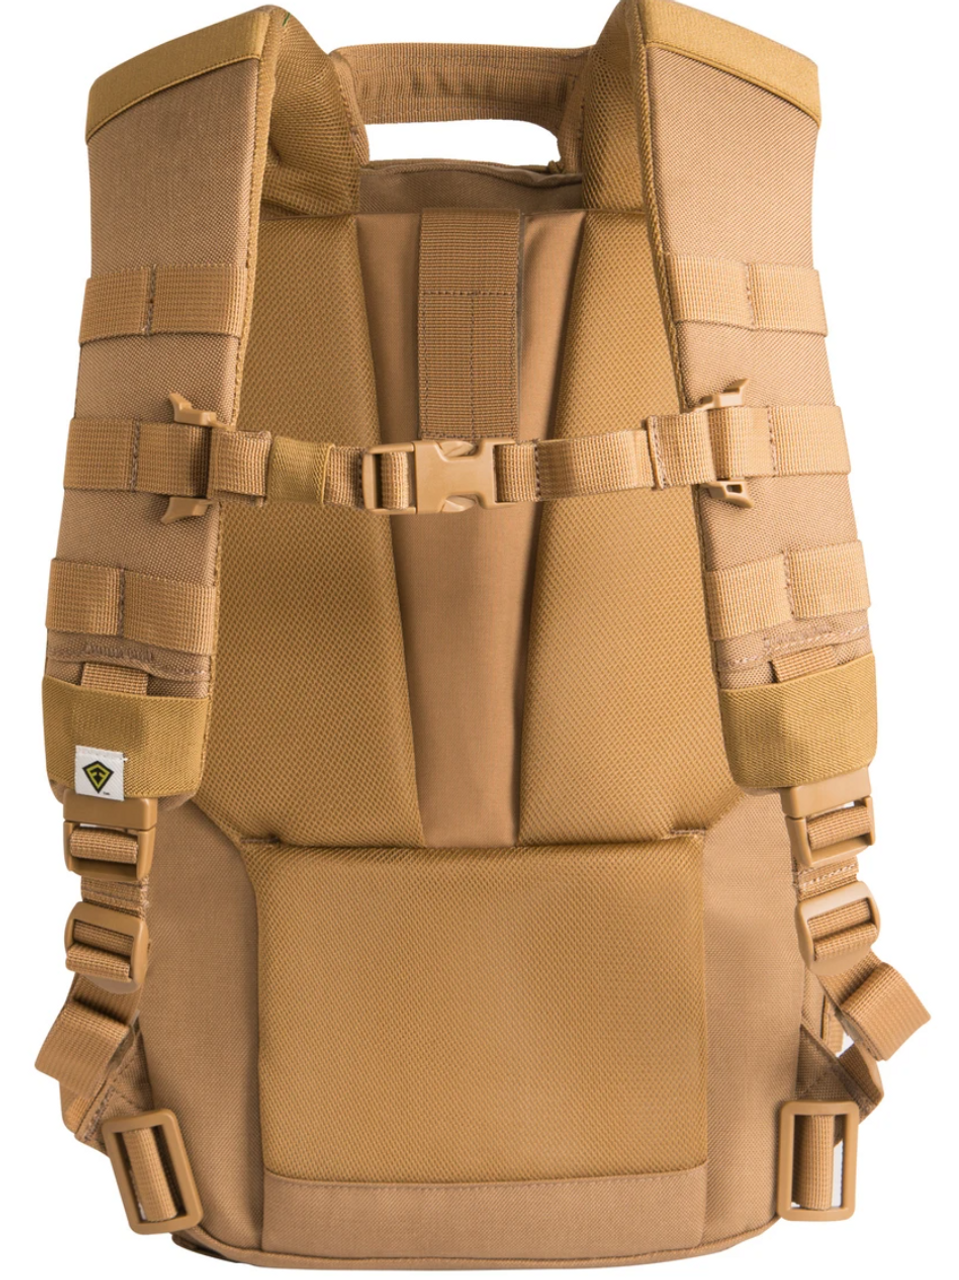 Dual density shoulder straps, double layered bottom, internal hook/loop mounting system, and a reliable external web platform compatible with MOLLE/PALS set this tactical pack apart from others in strength, function, and comfort. With ample space for your essential gear, superior organizational features, and featuring First Tactical’s new Hook & Hang Thru™ System, the Specialist 0.5-Day backpack is the best choice for quick trips or EDC.